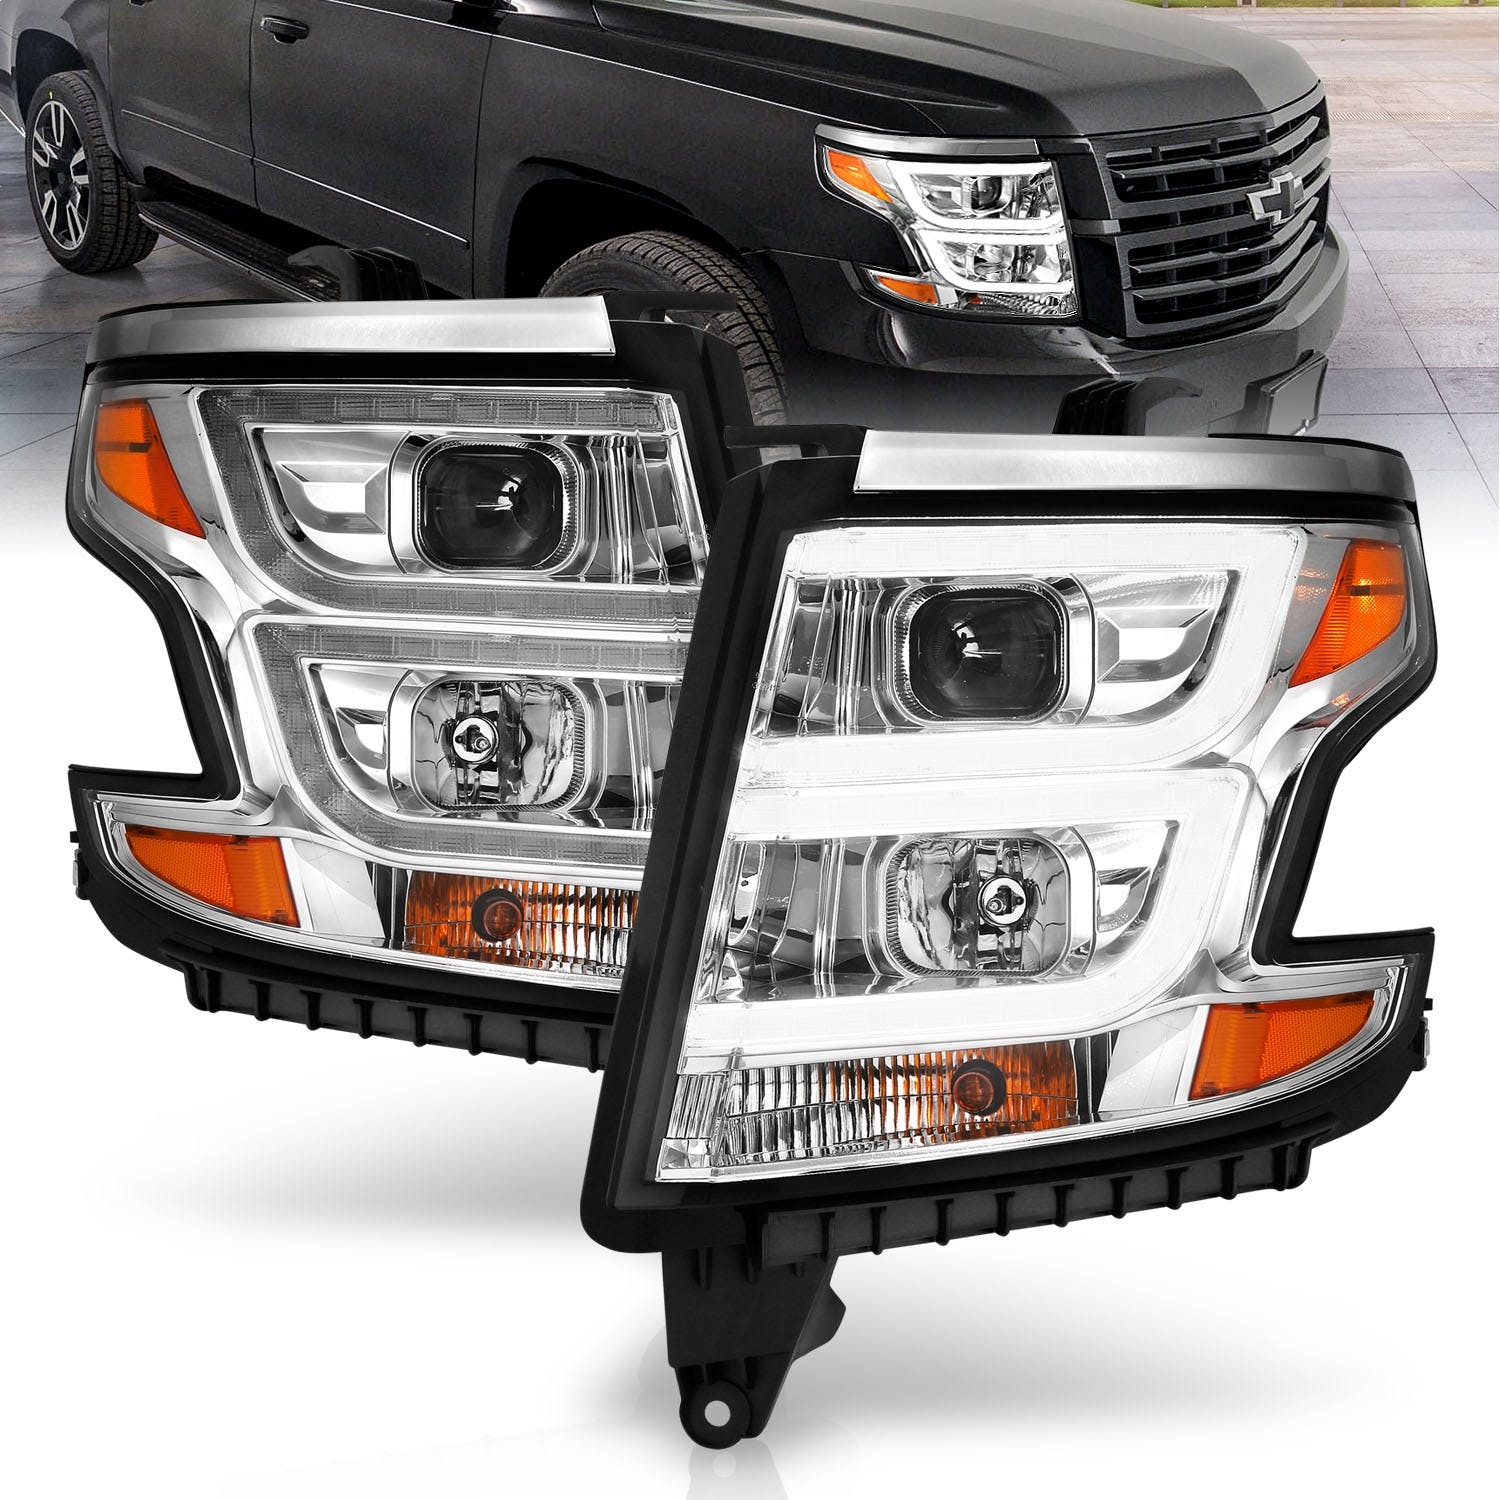 AnzoUSA 111493 Projector Headlights Plank Style Chrome with DRL